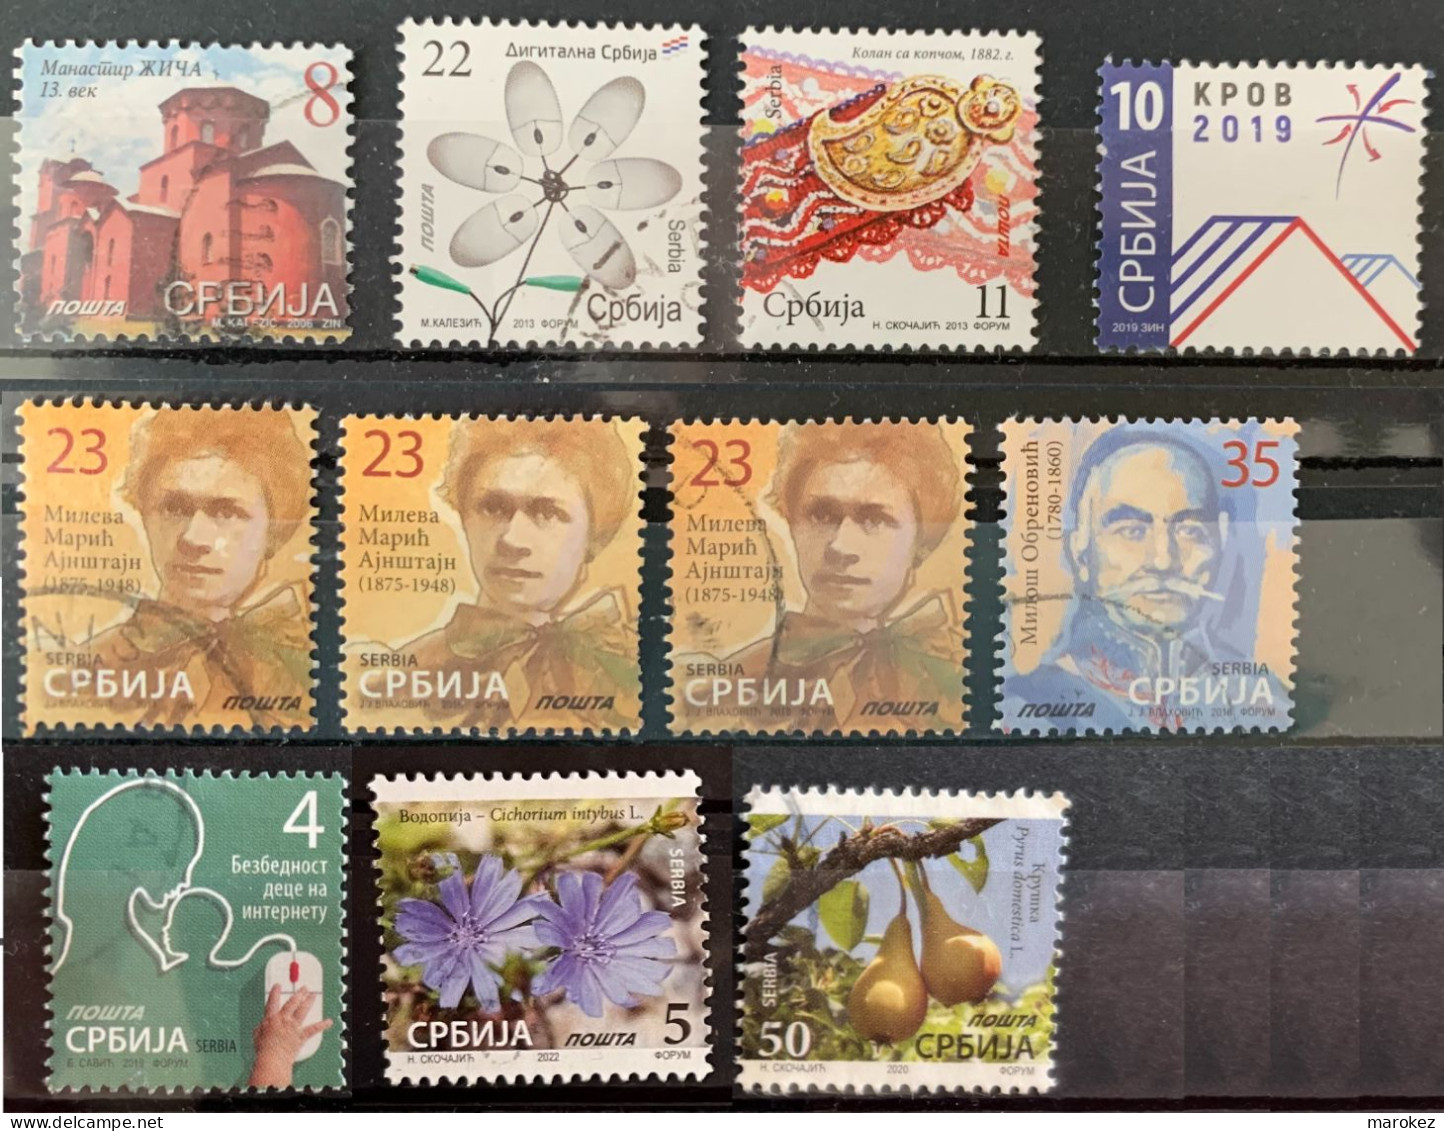 SERBIA 2006-2020 Definitives & Compulsory Surtax Stamps - Postally Used MICHEL # 152,273,430,549,649,886,Z91,980,926II - Serbien